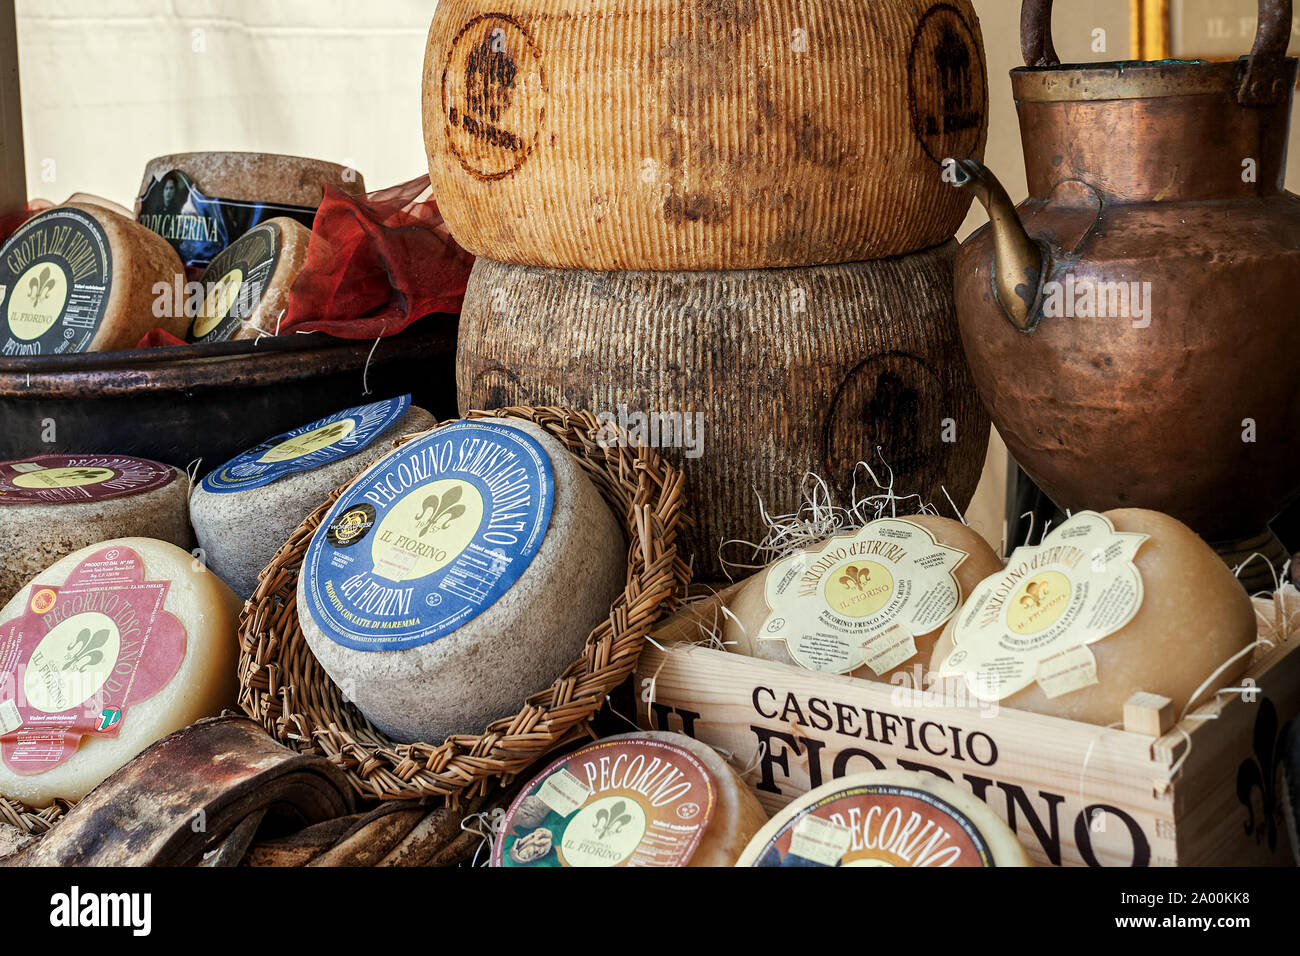 Different types of artisan smoked hard and pecorino cheese on the stall during traditional International Cheese Market. Stock Photo